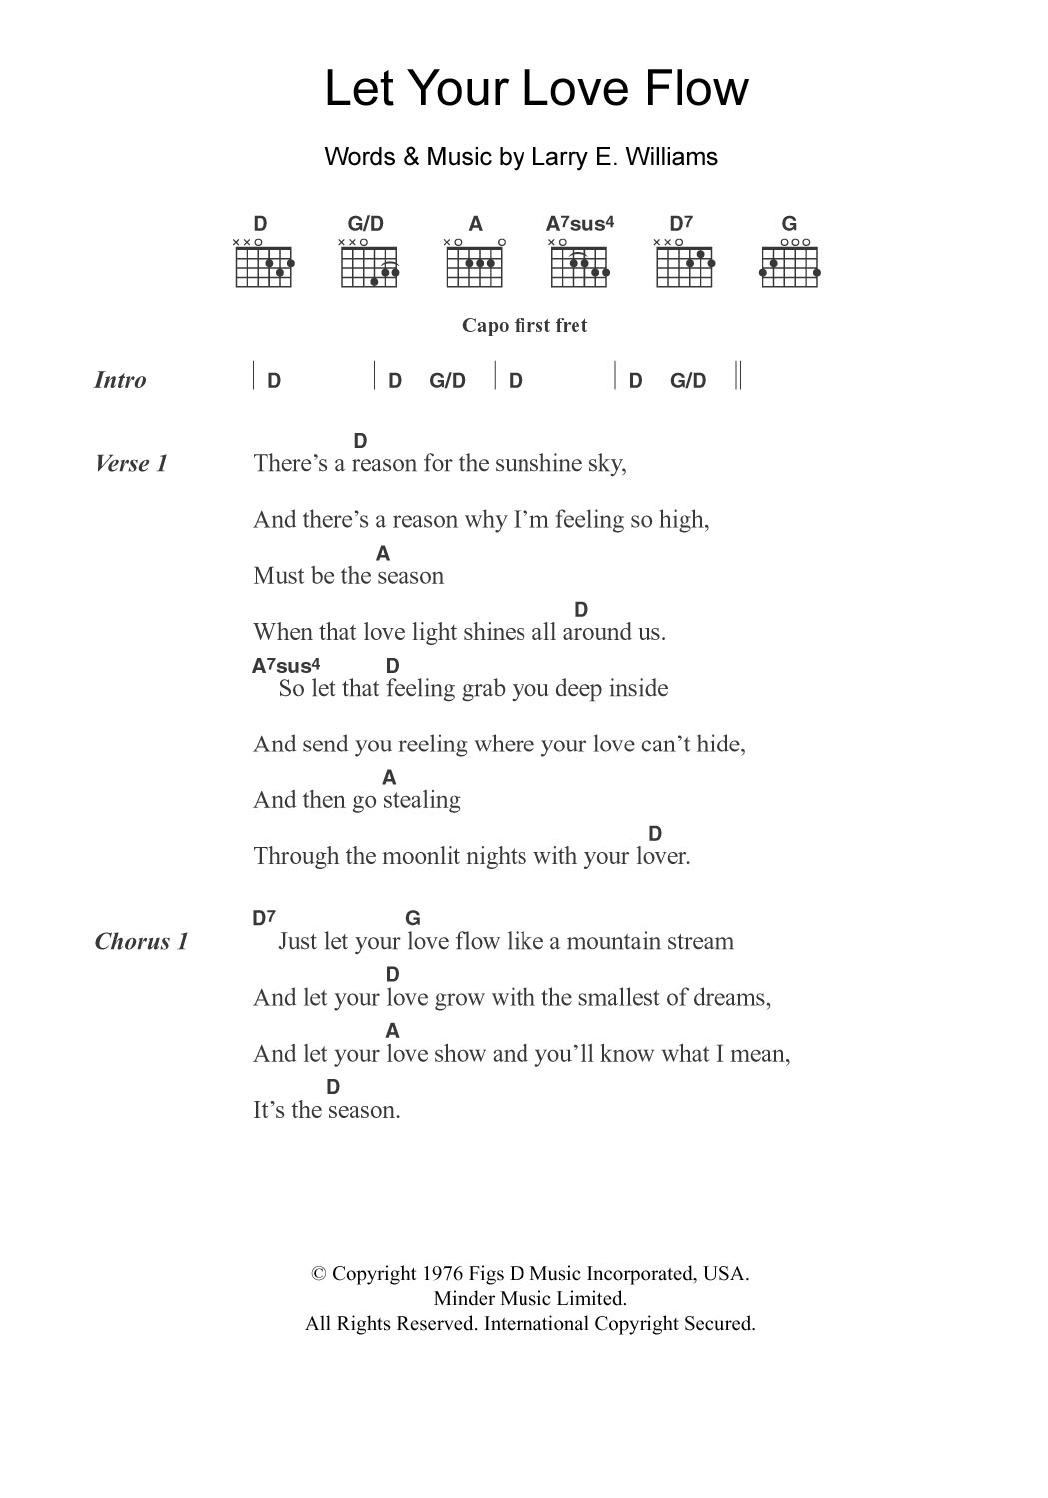 Download The Bellamy Brothers Let Your Love Flow Sheet Music